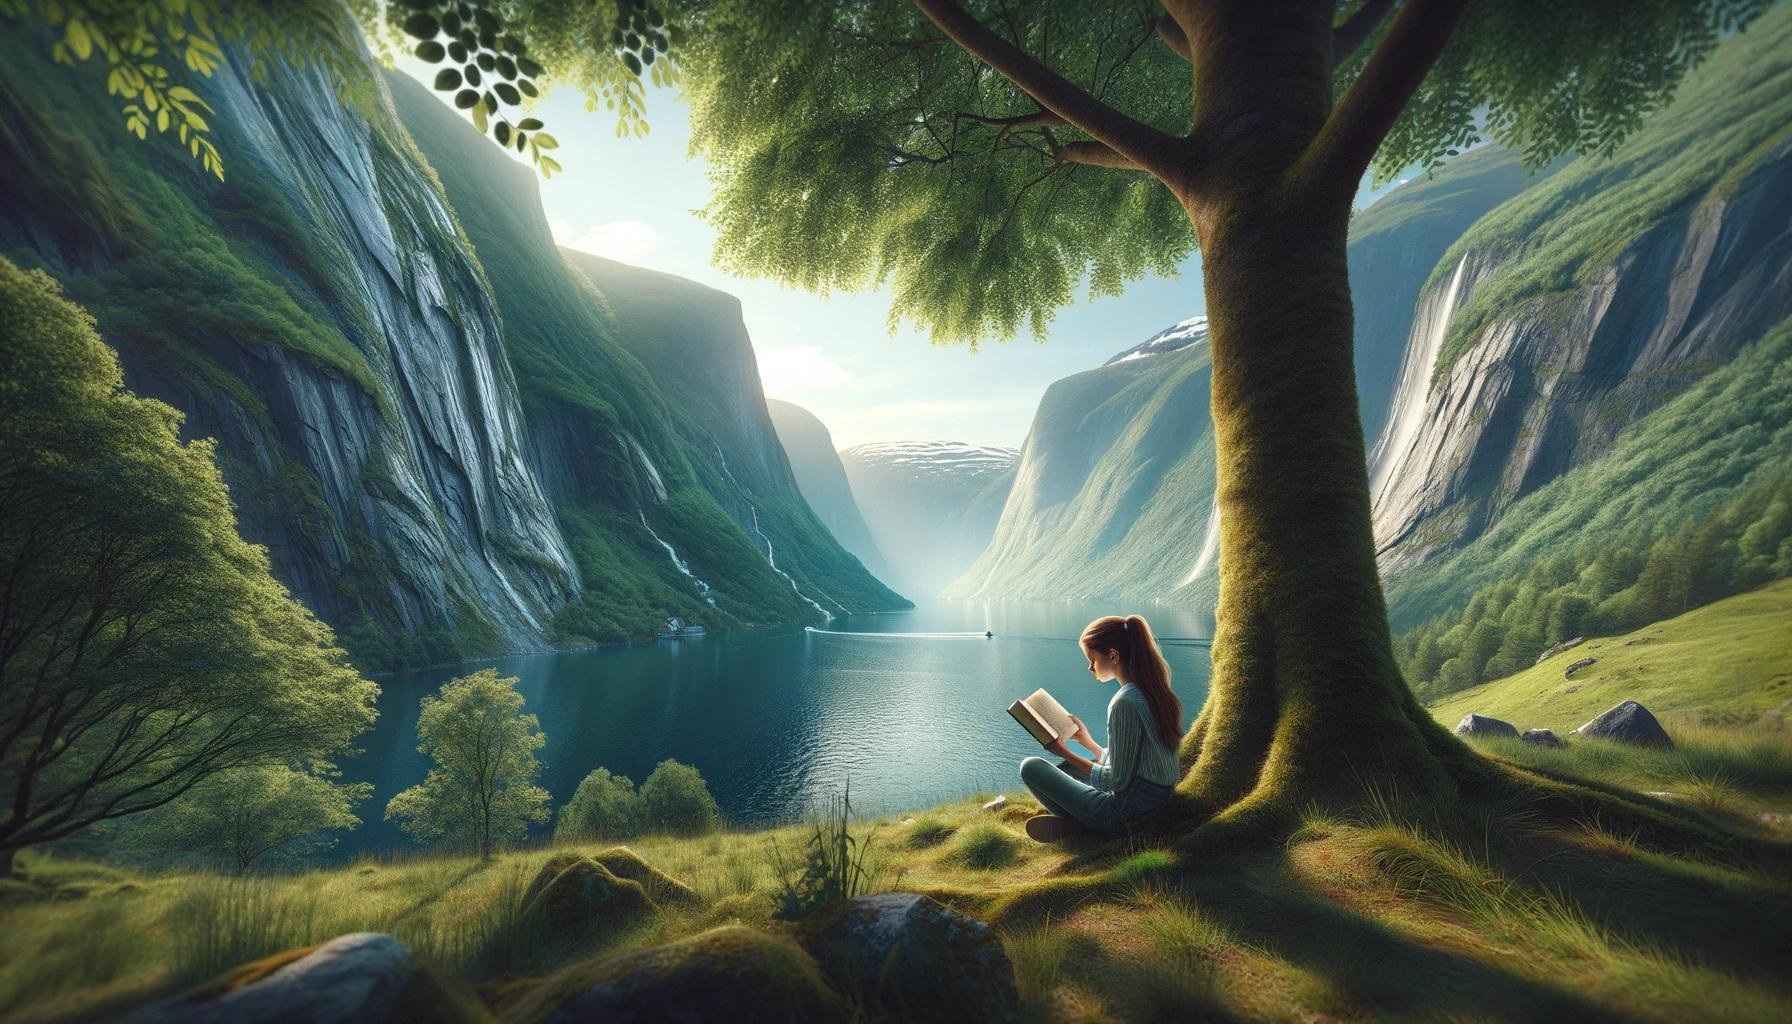 Woman reading a book under a tree in the Norway fjords region.